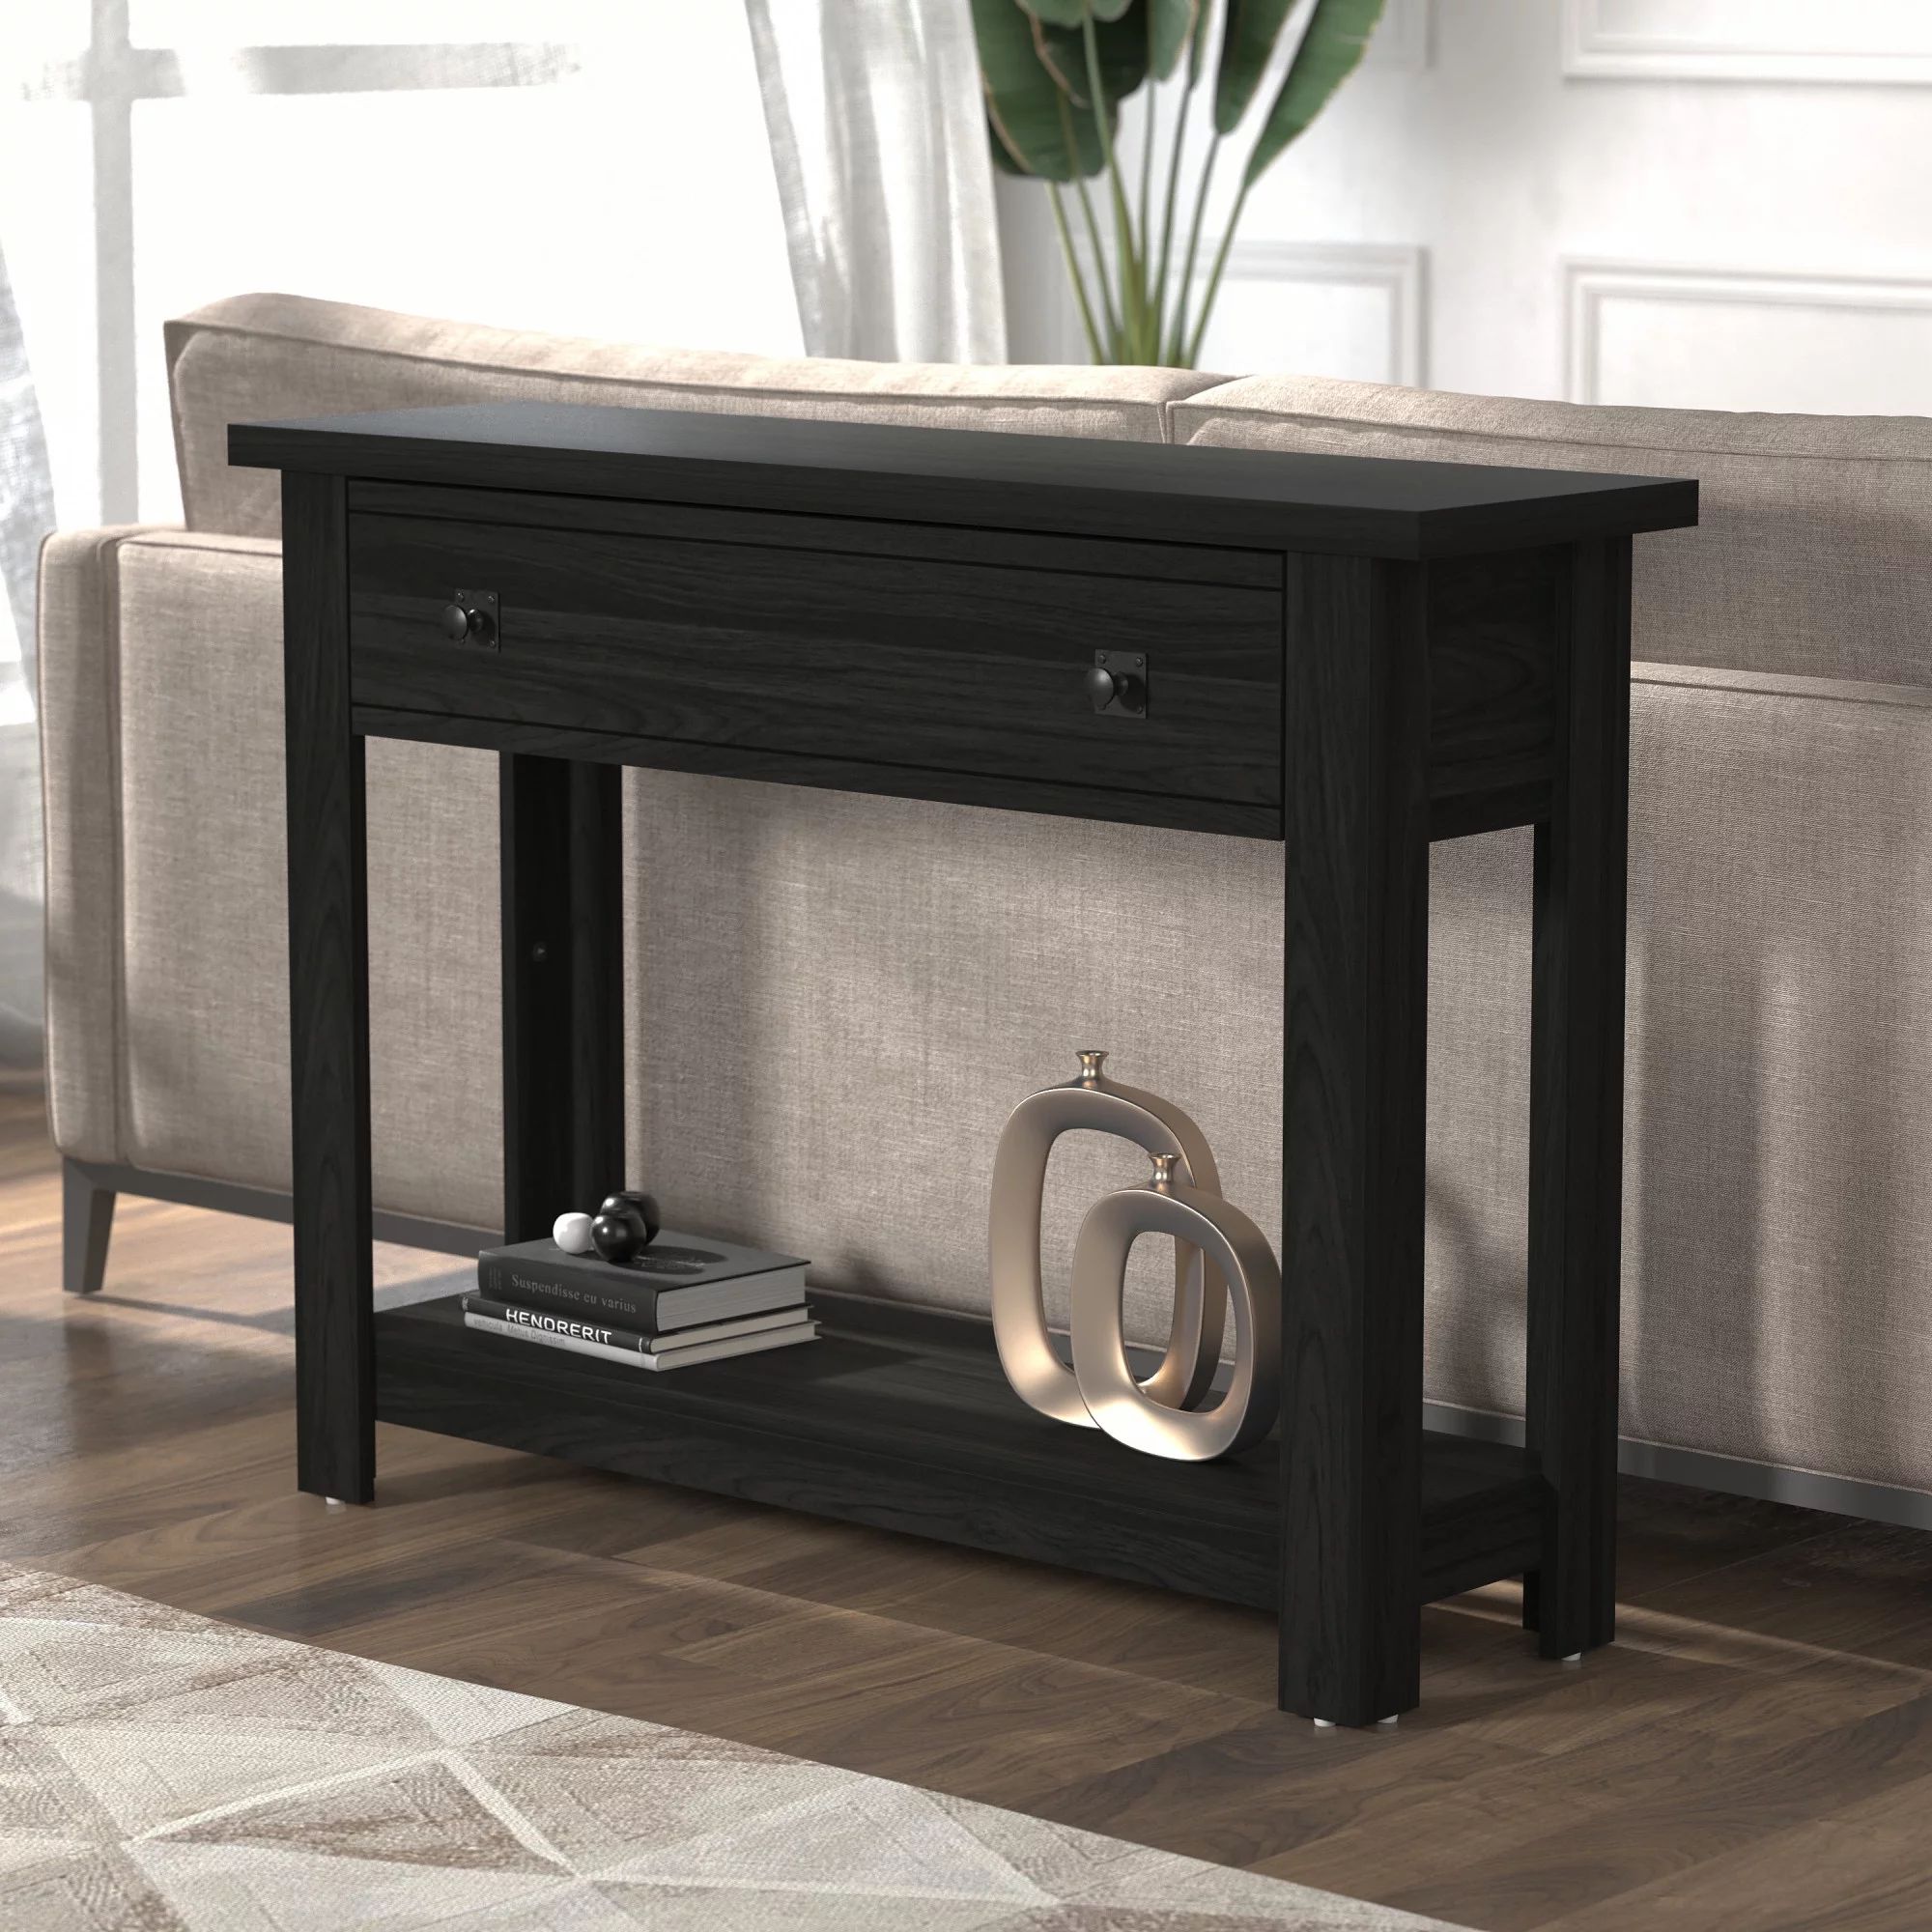 Coover Wood Console Table with 1 Drawer, Black - Walmart.com | Walmart (US)